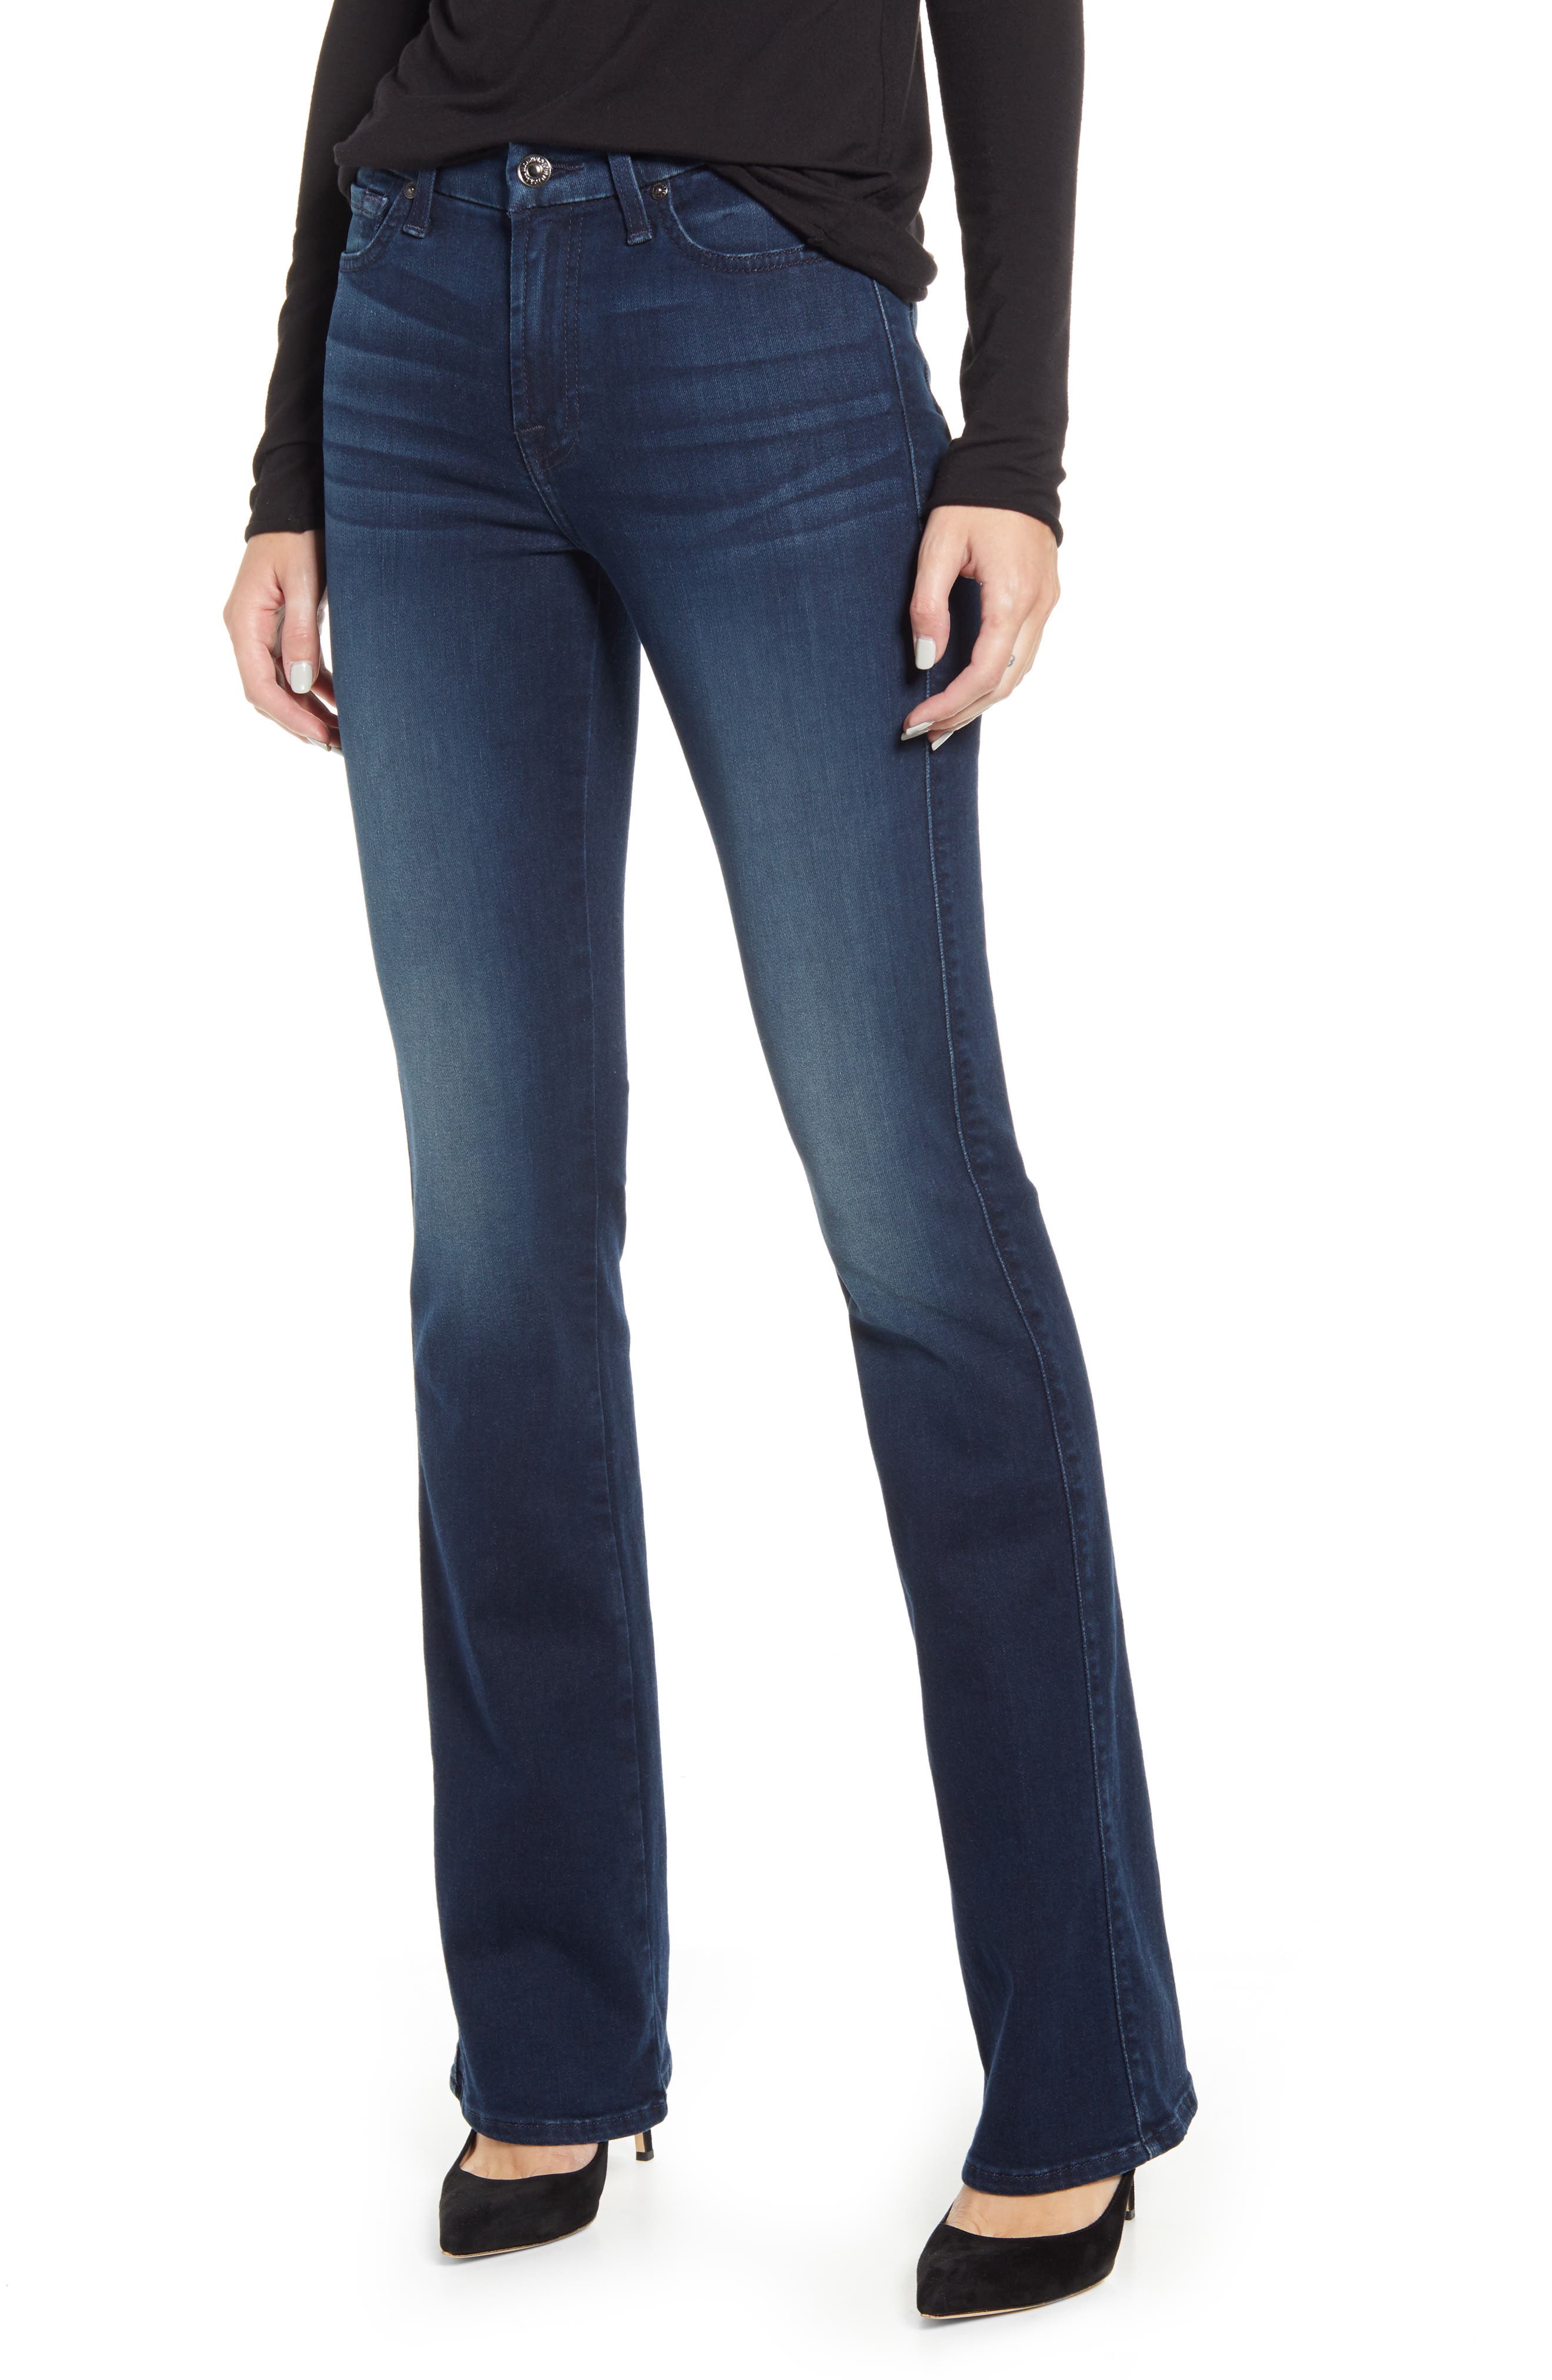 7 for all mankind bootcut jeans womens